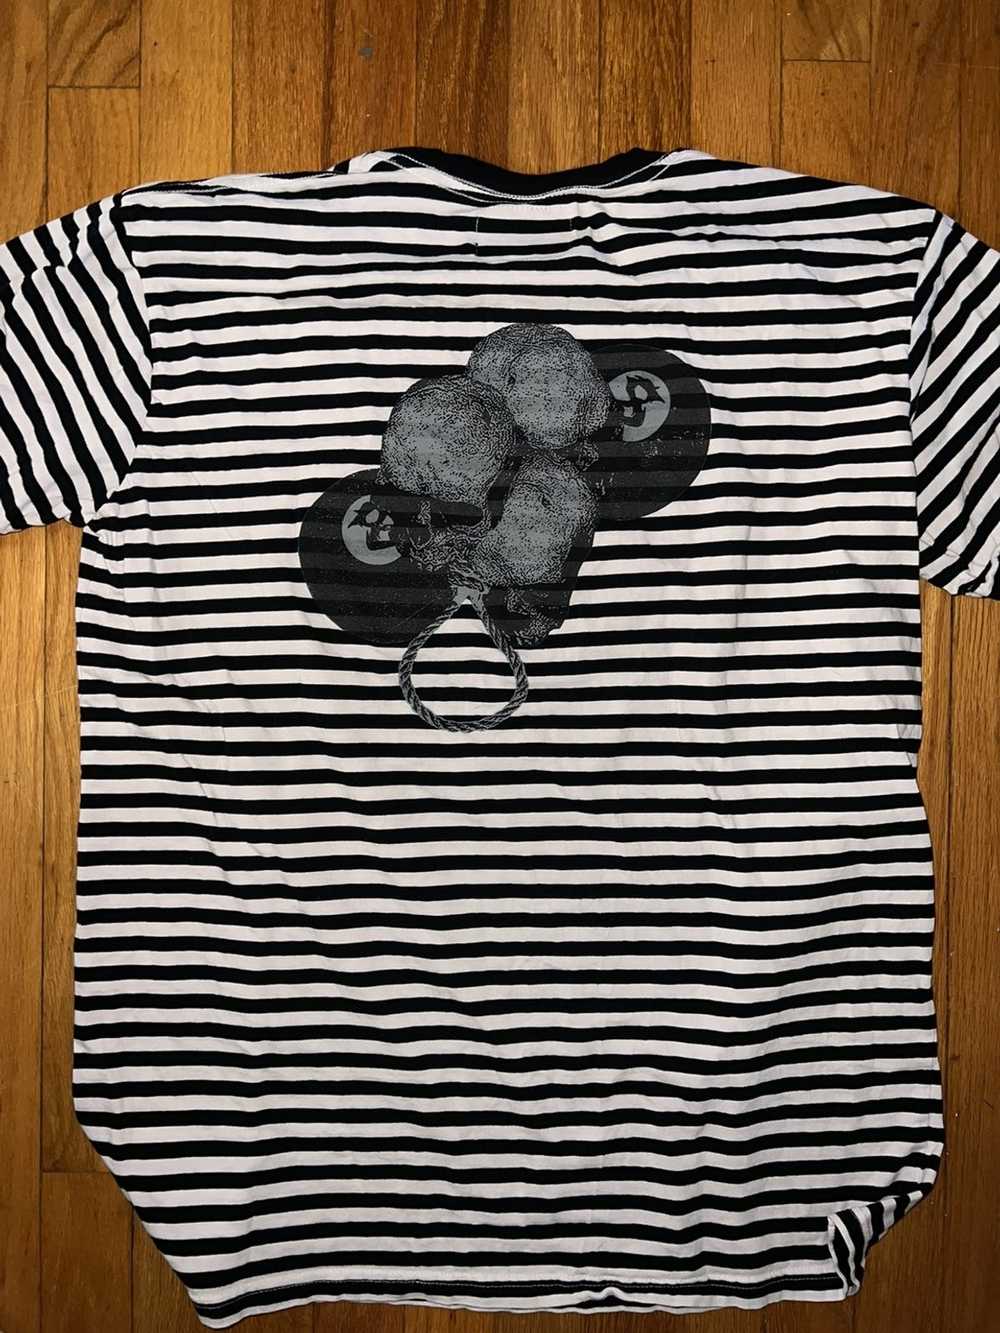 Section 8 SECTION 8 SKULL STRIPED TSHIRT - image 2